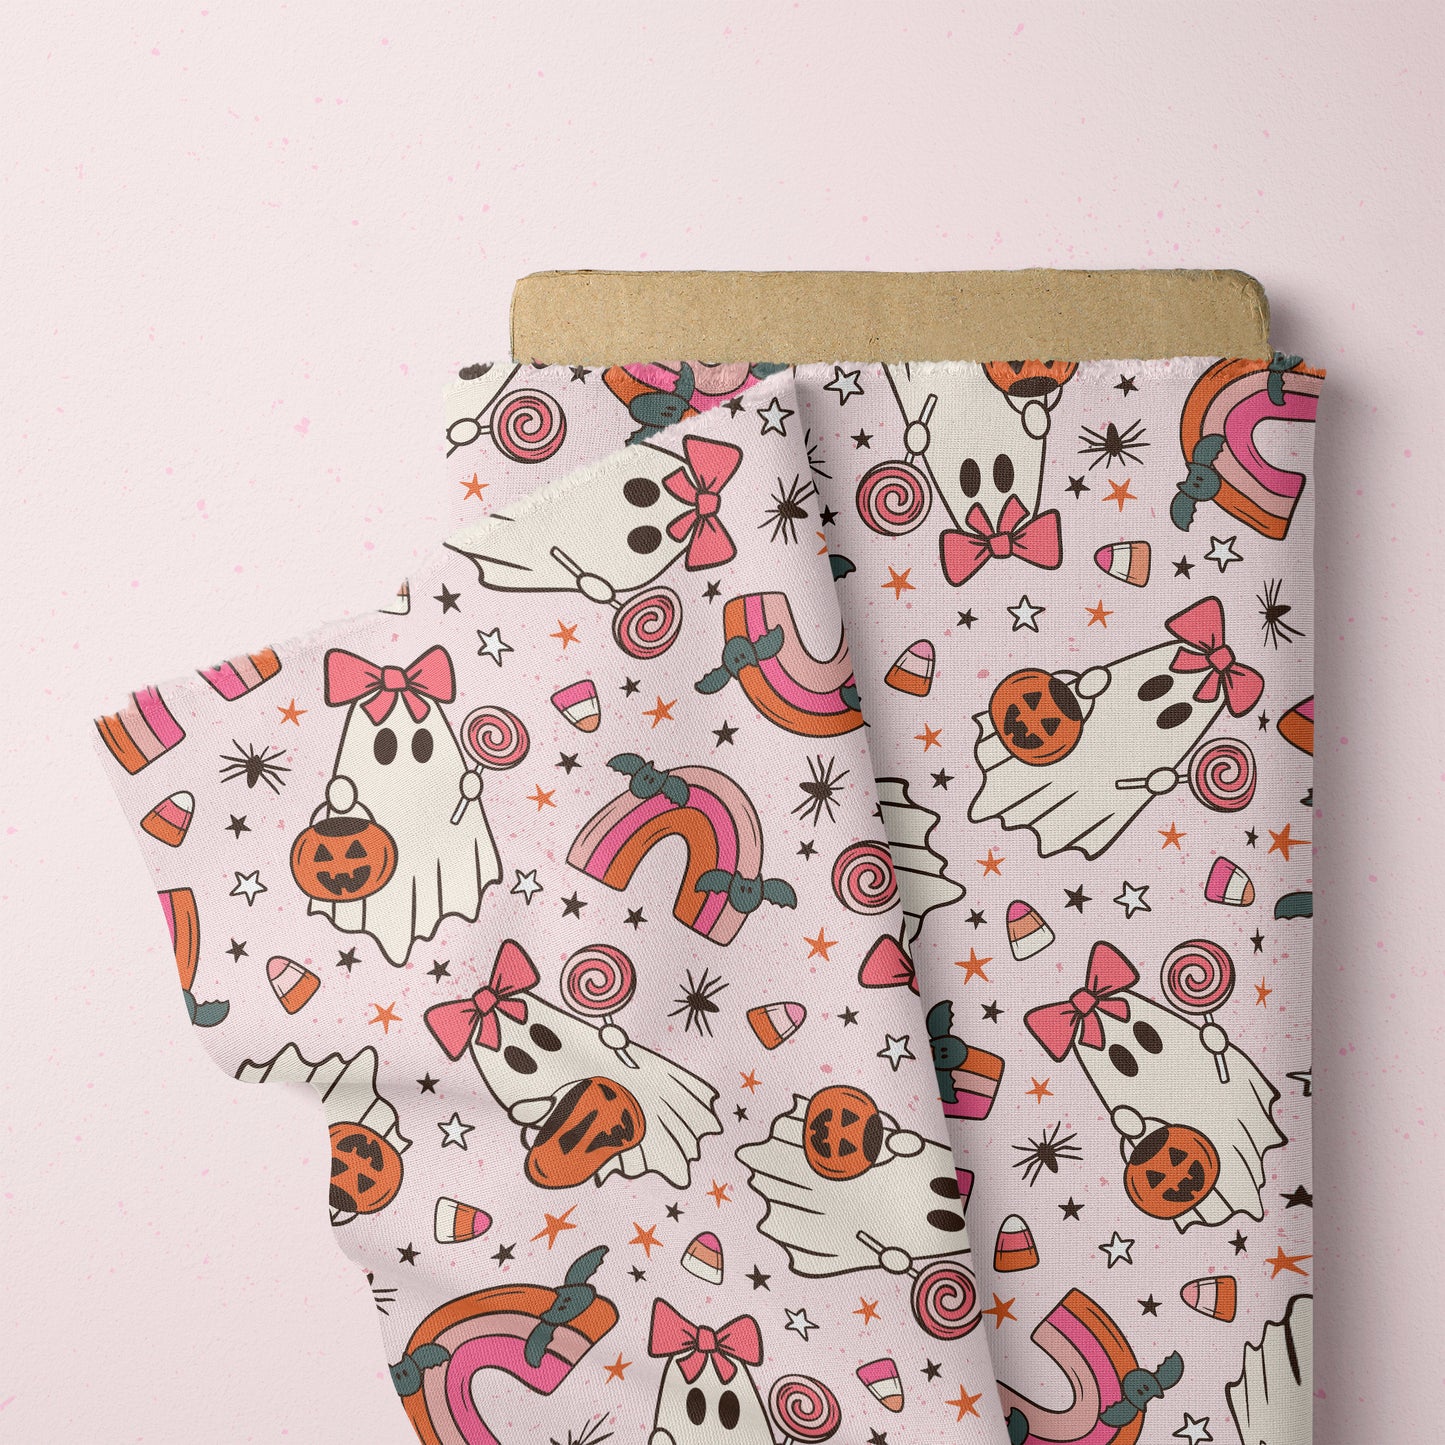 Spooky Halloween Seamless Pattern Cute Ghost Pattern File for Fabric Sublimation